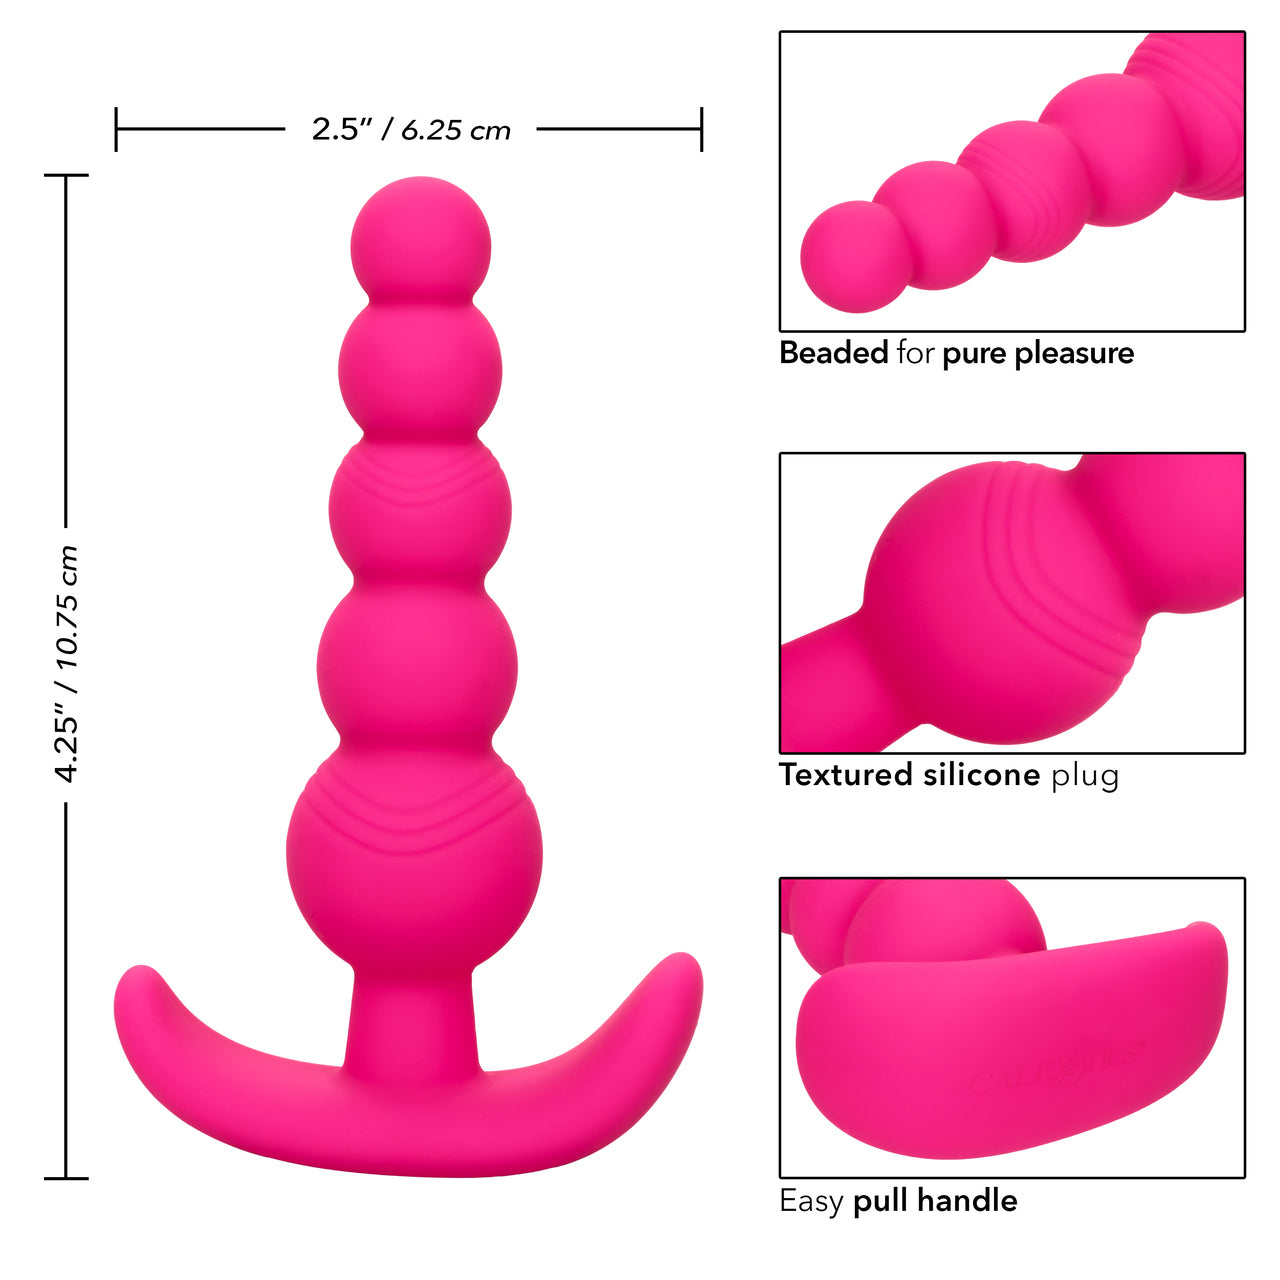 Cheeky X-5 Beads - Thorn & Feather Sex Toy Canada